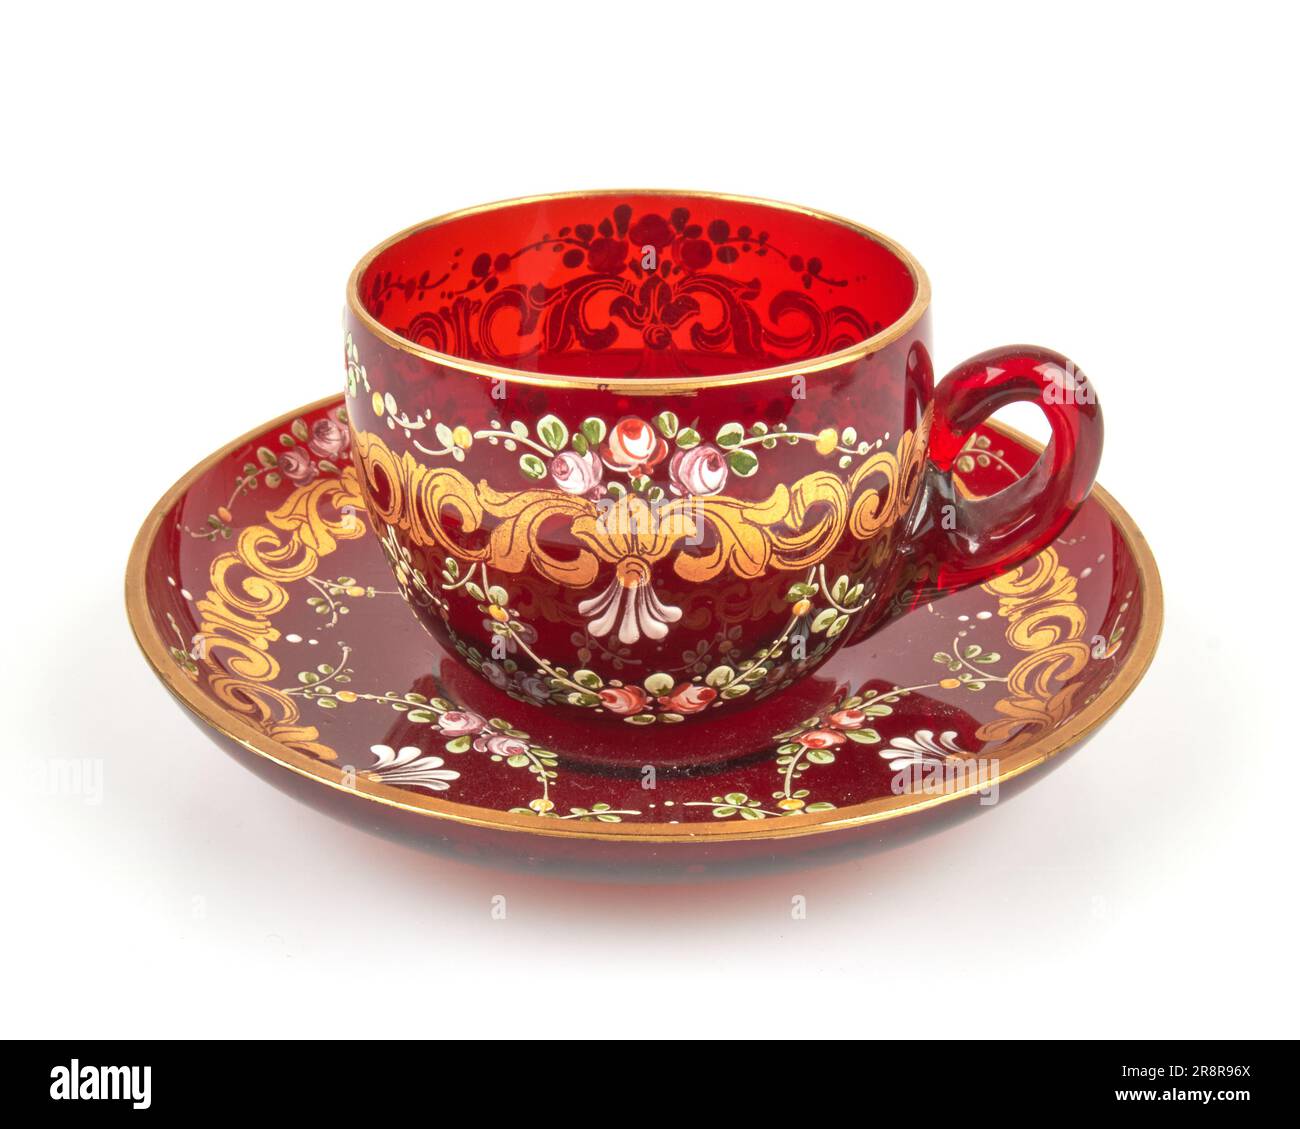 Antique 1920 30s Venetian Murano enamelled and gilded red glass cup and saucer Stock Photo